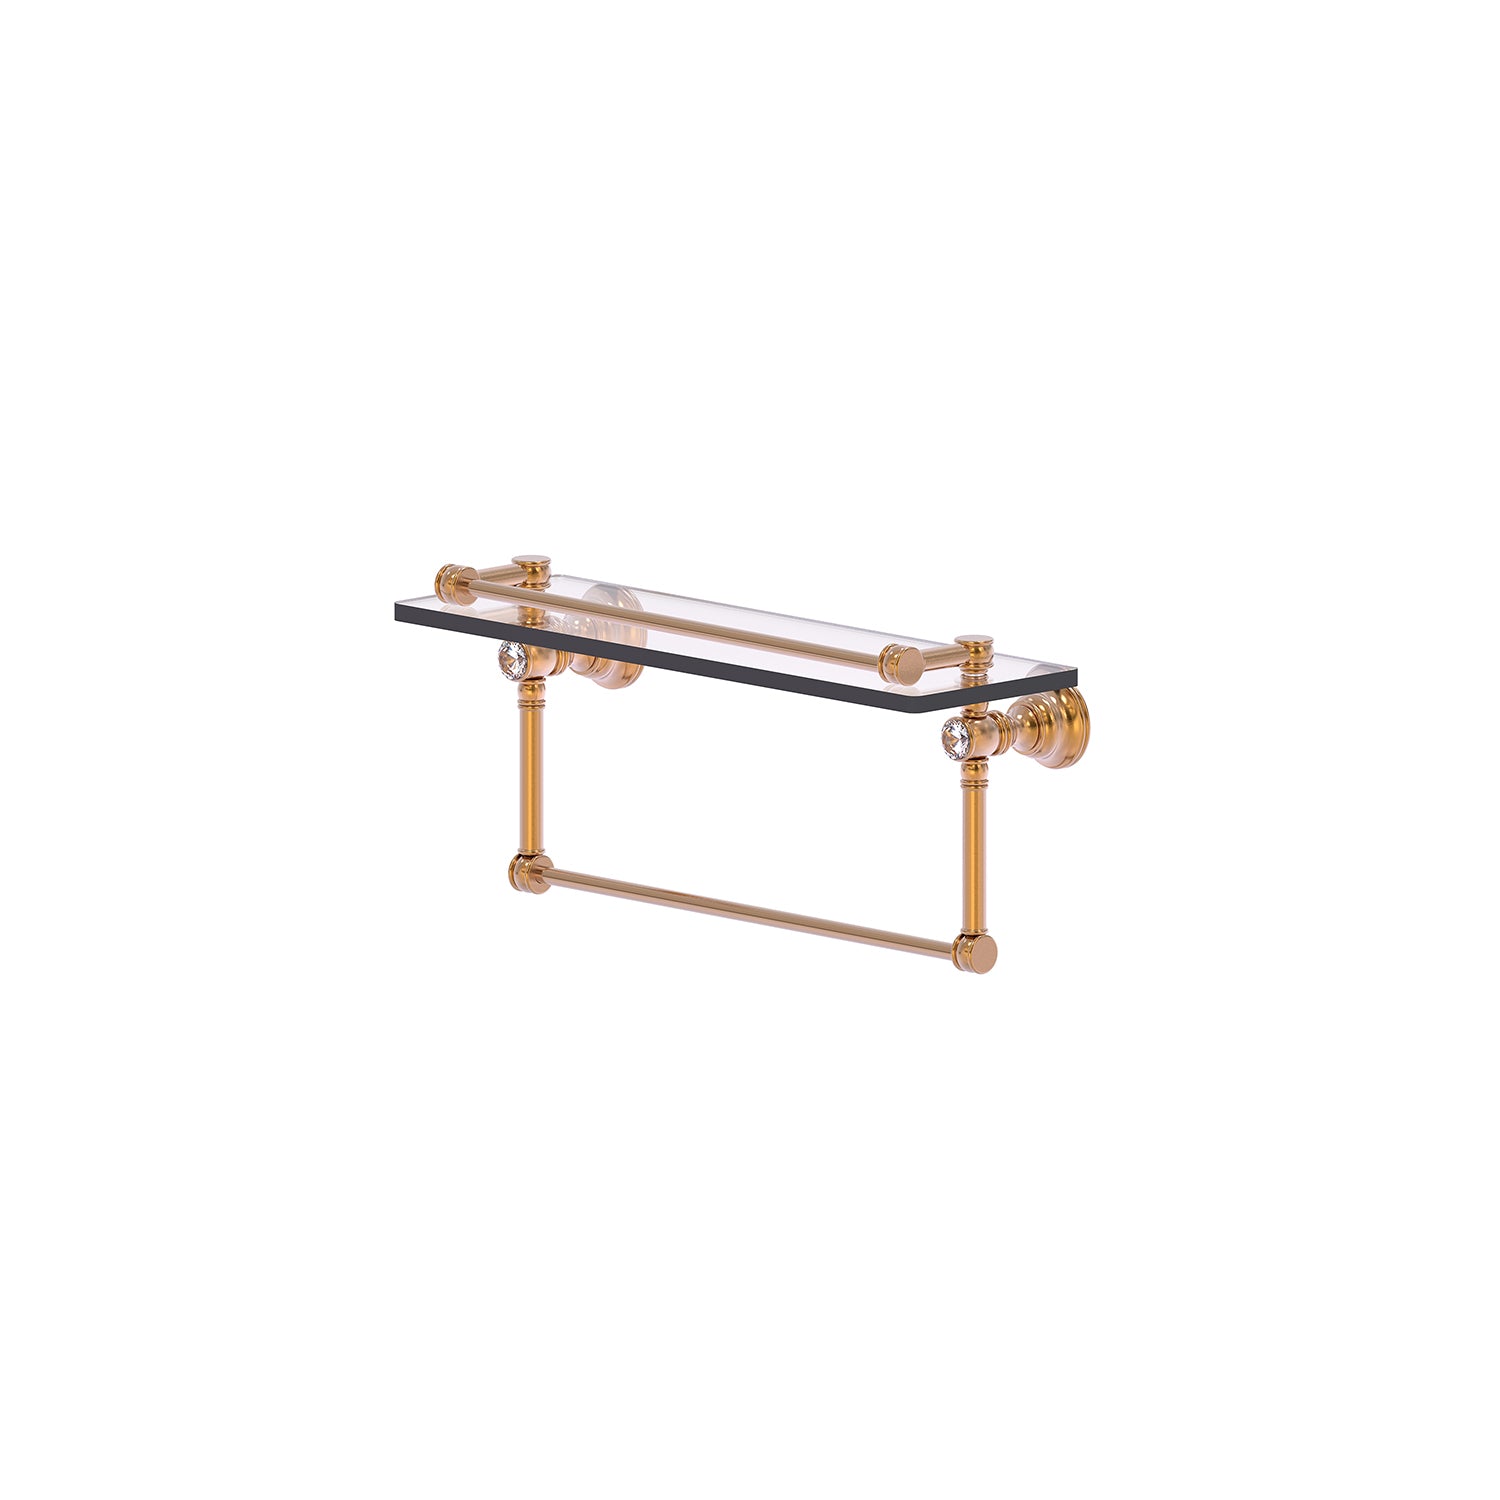 Allied Brass PG-1-22-GAL Pacific Grove Collection 22 Inch Gallery Rail  Glass Shelf, Unlacquered Brass, Bathroom Shelves -  Canada